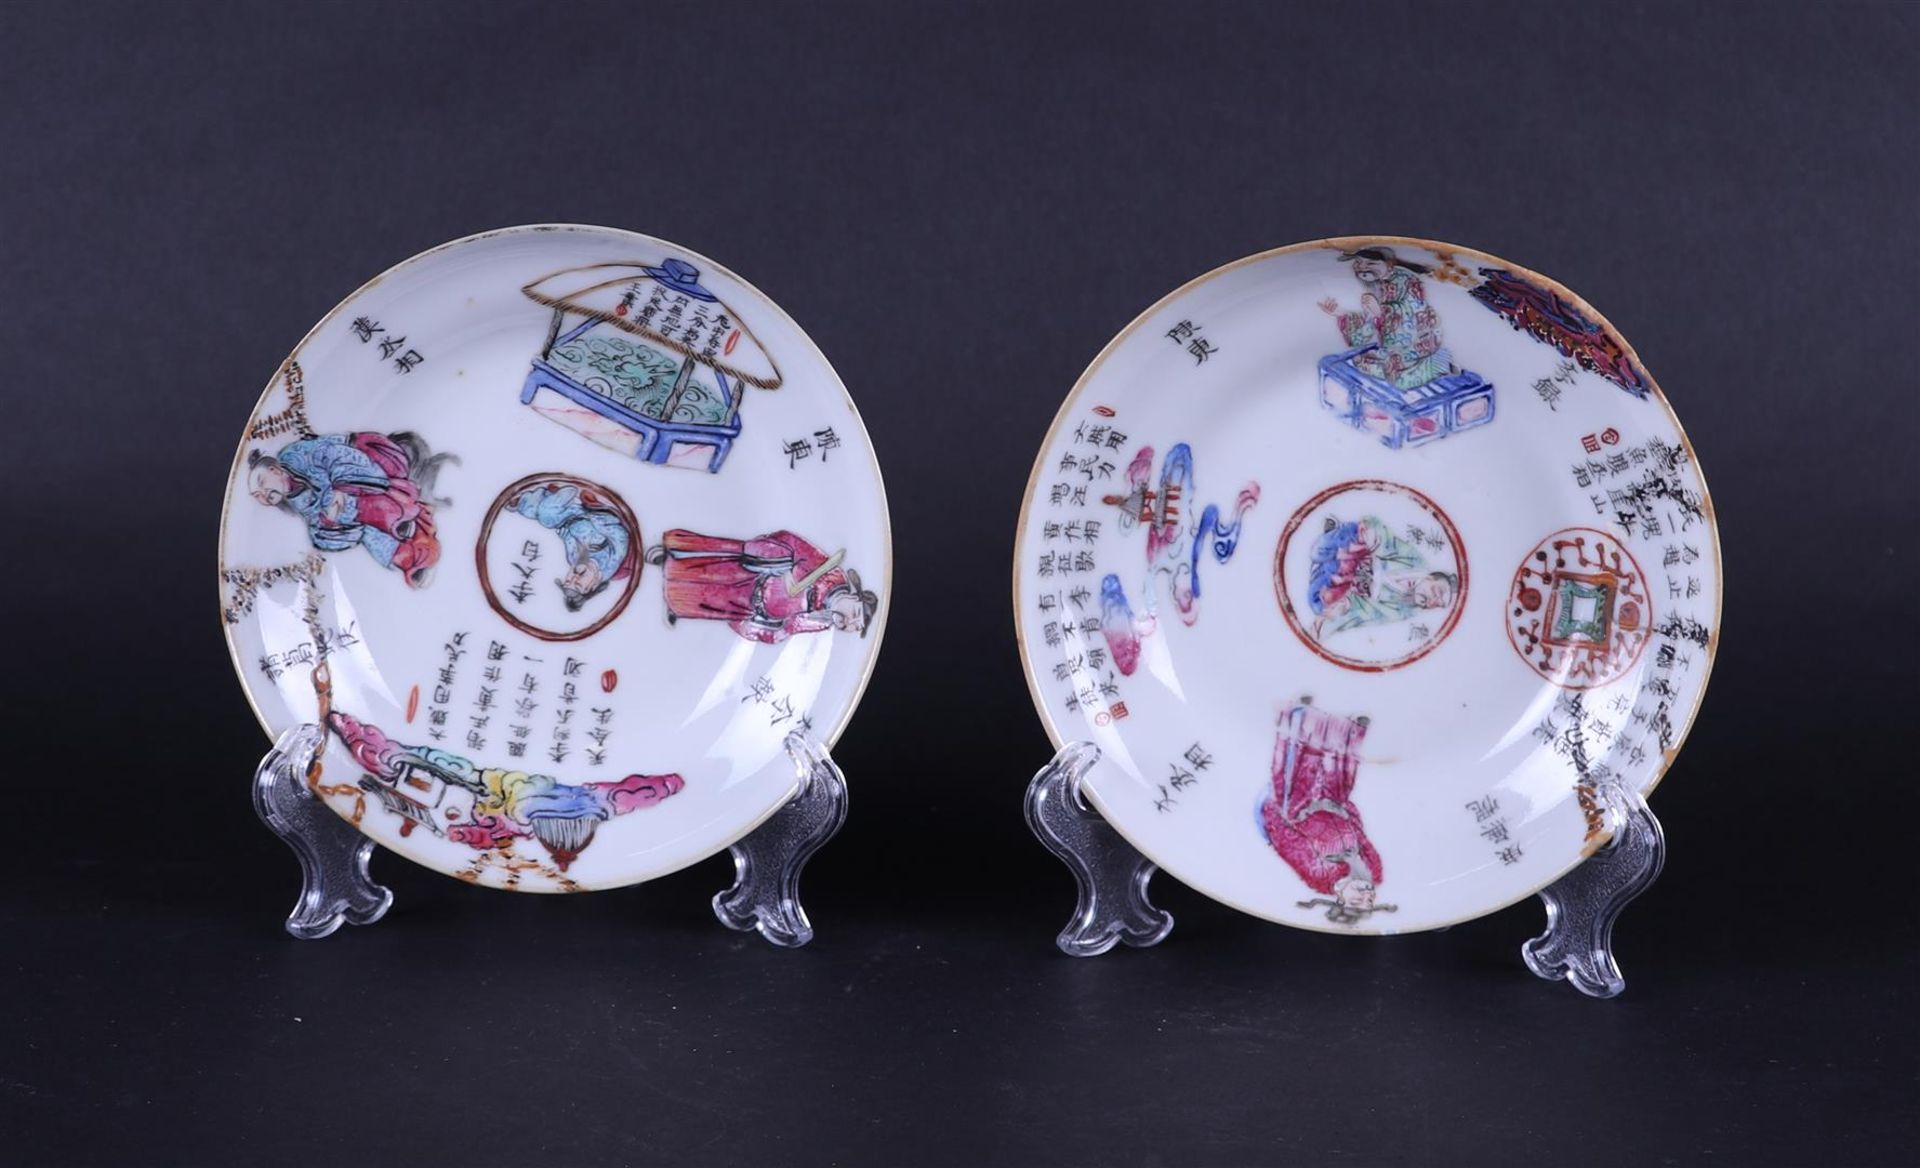 Two porcelain saucers Famille Rose with Wu Shuang Pu decoration. China, 19th century.